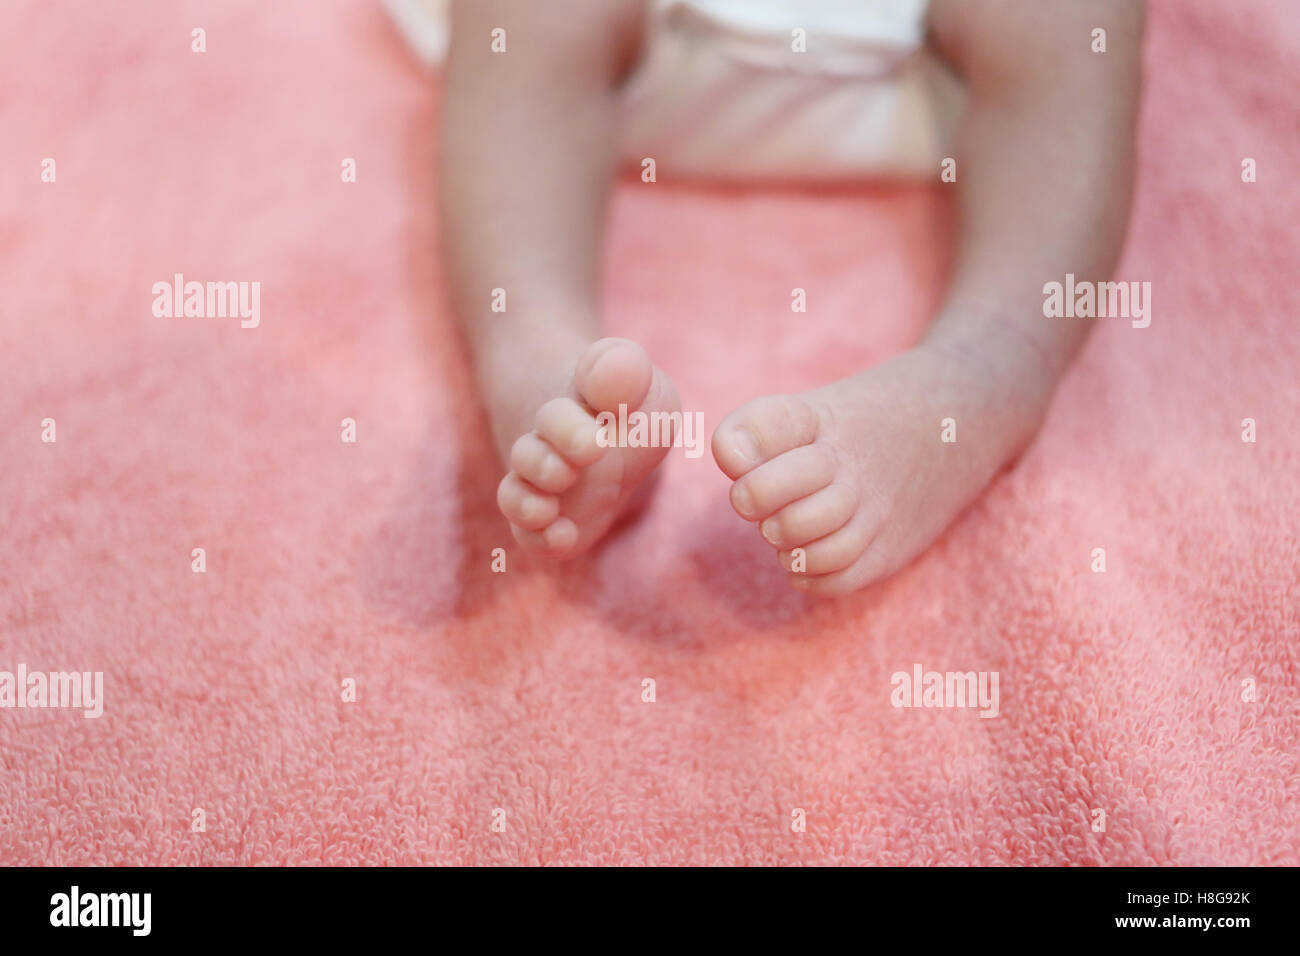 Foot of a baby on a bed of pink. Stock Photo